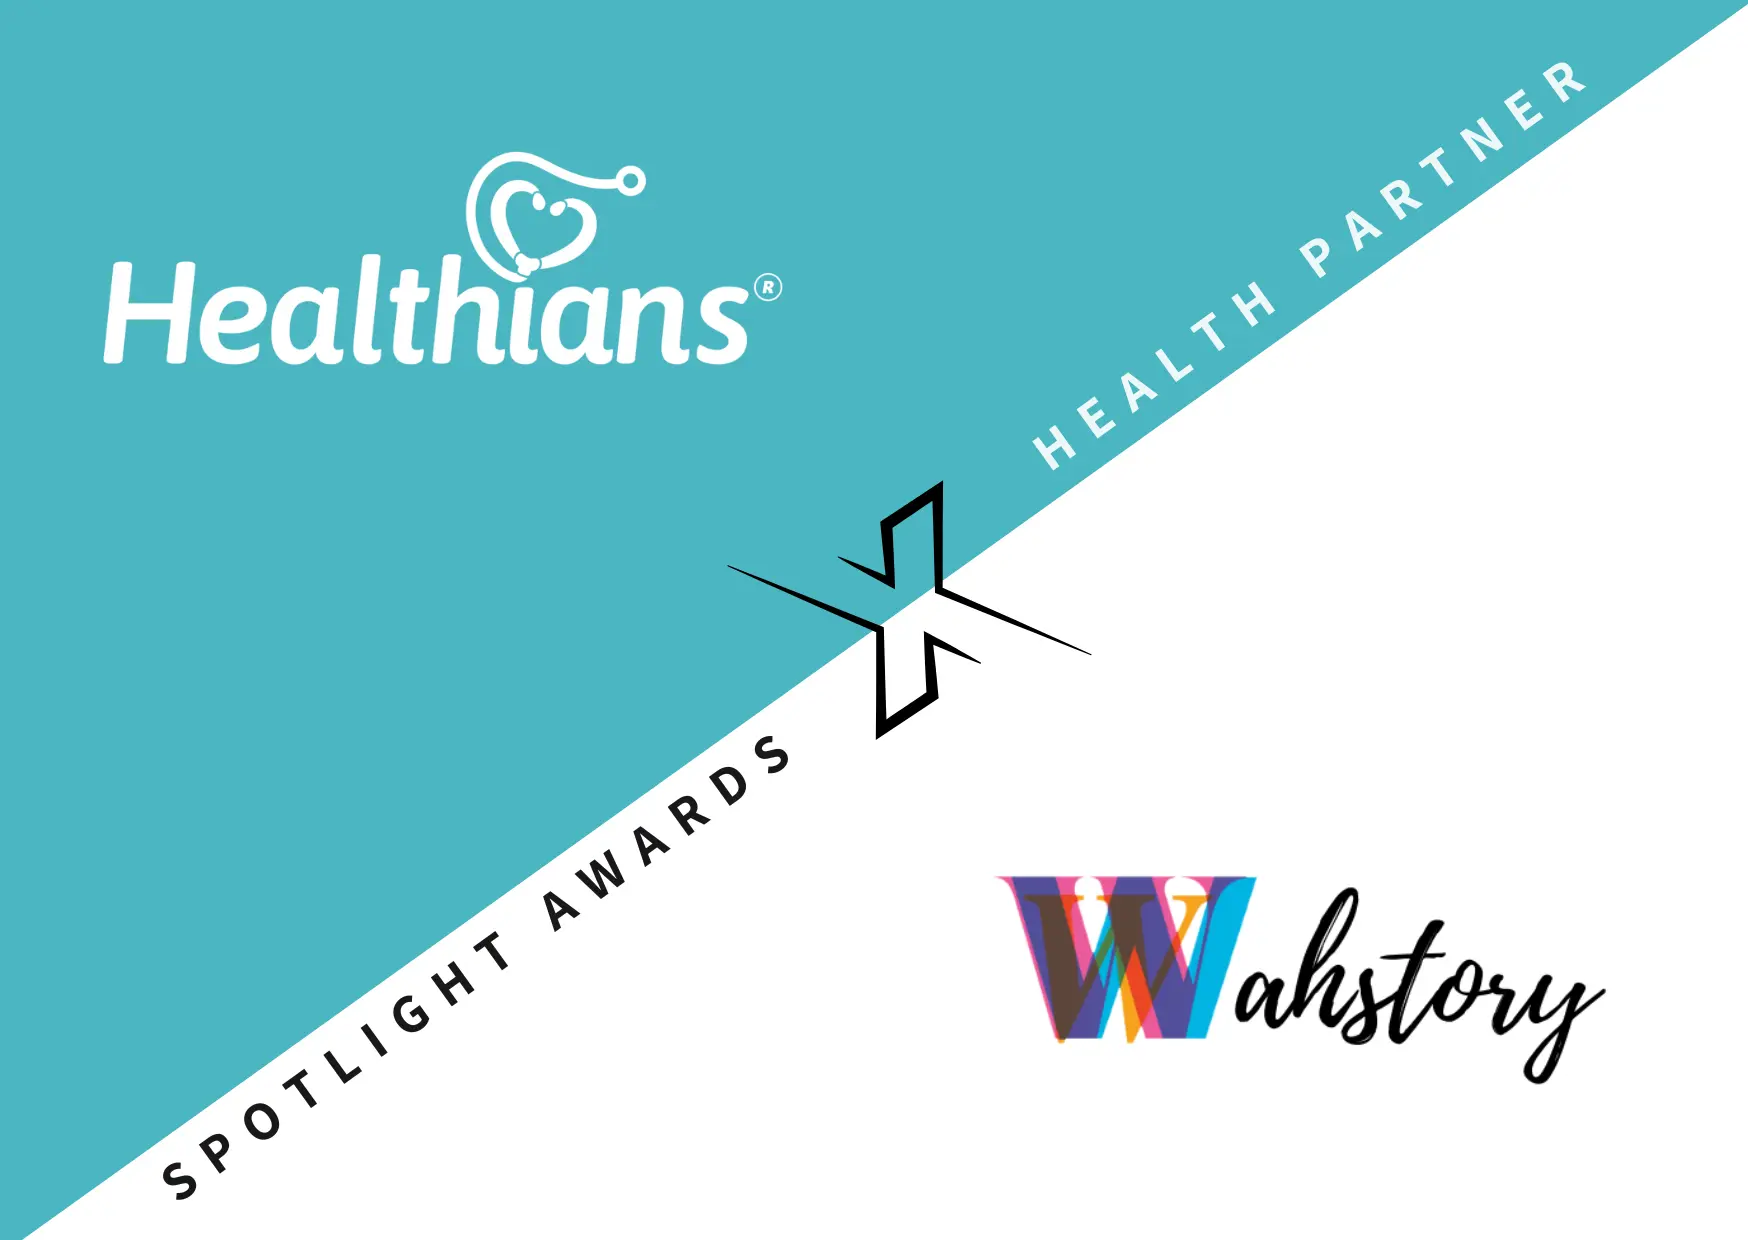 Healthians partners with WAHStory to Promote Wellness and Storytelling through Spotlight Awards